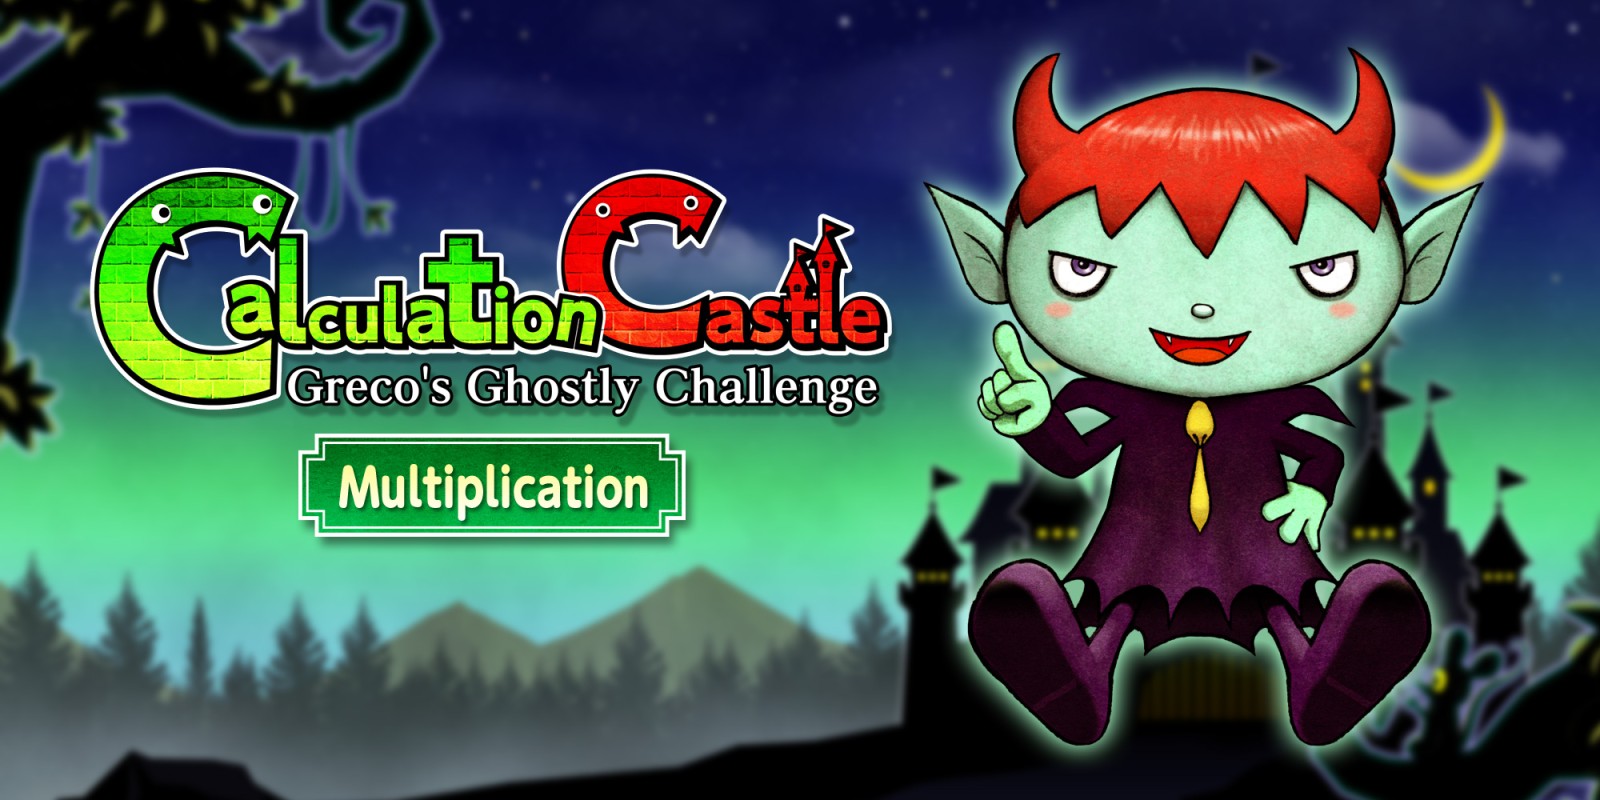 Calculation Castle: Greco's Ghostly Challenge "Multiplication"